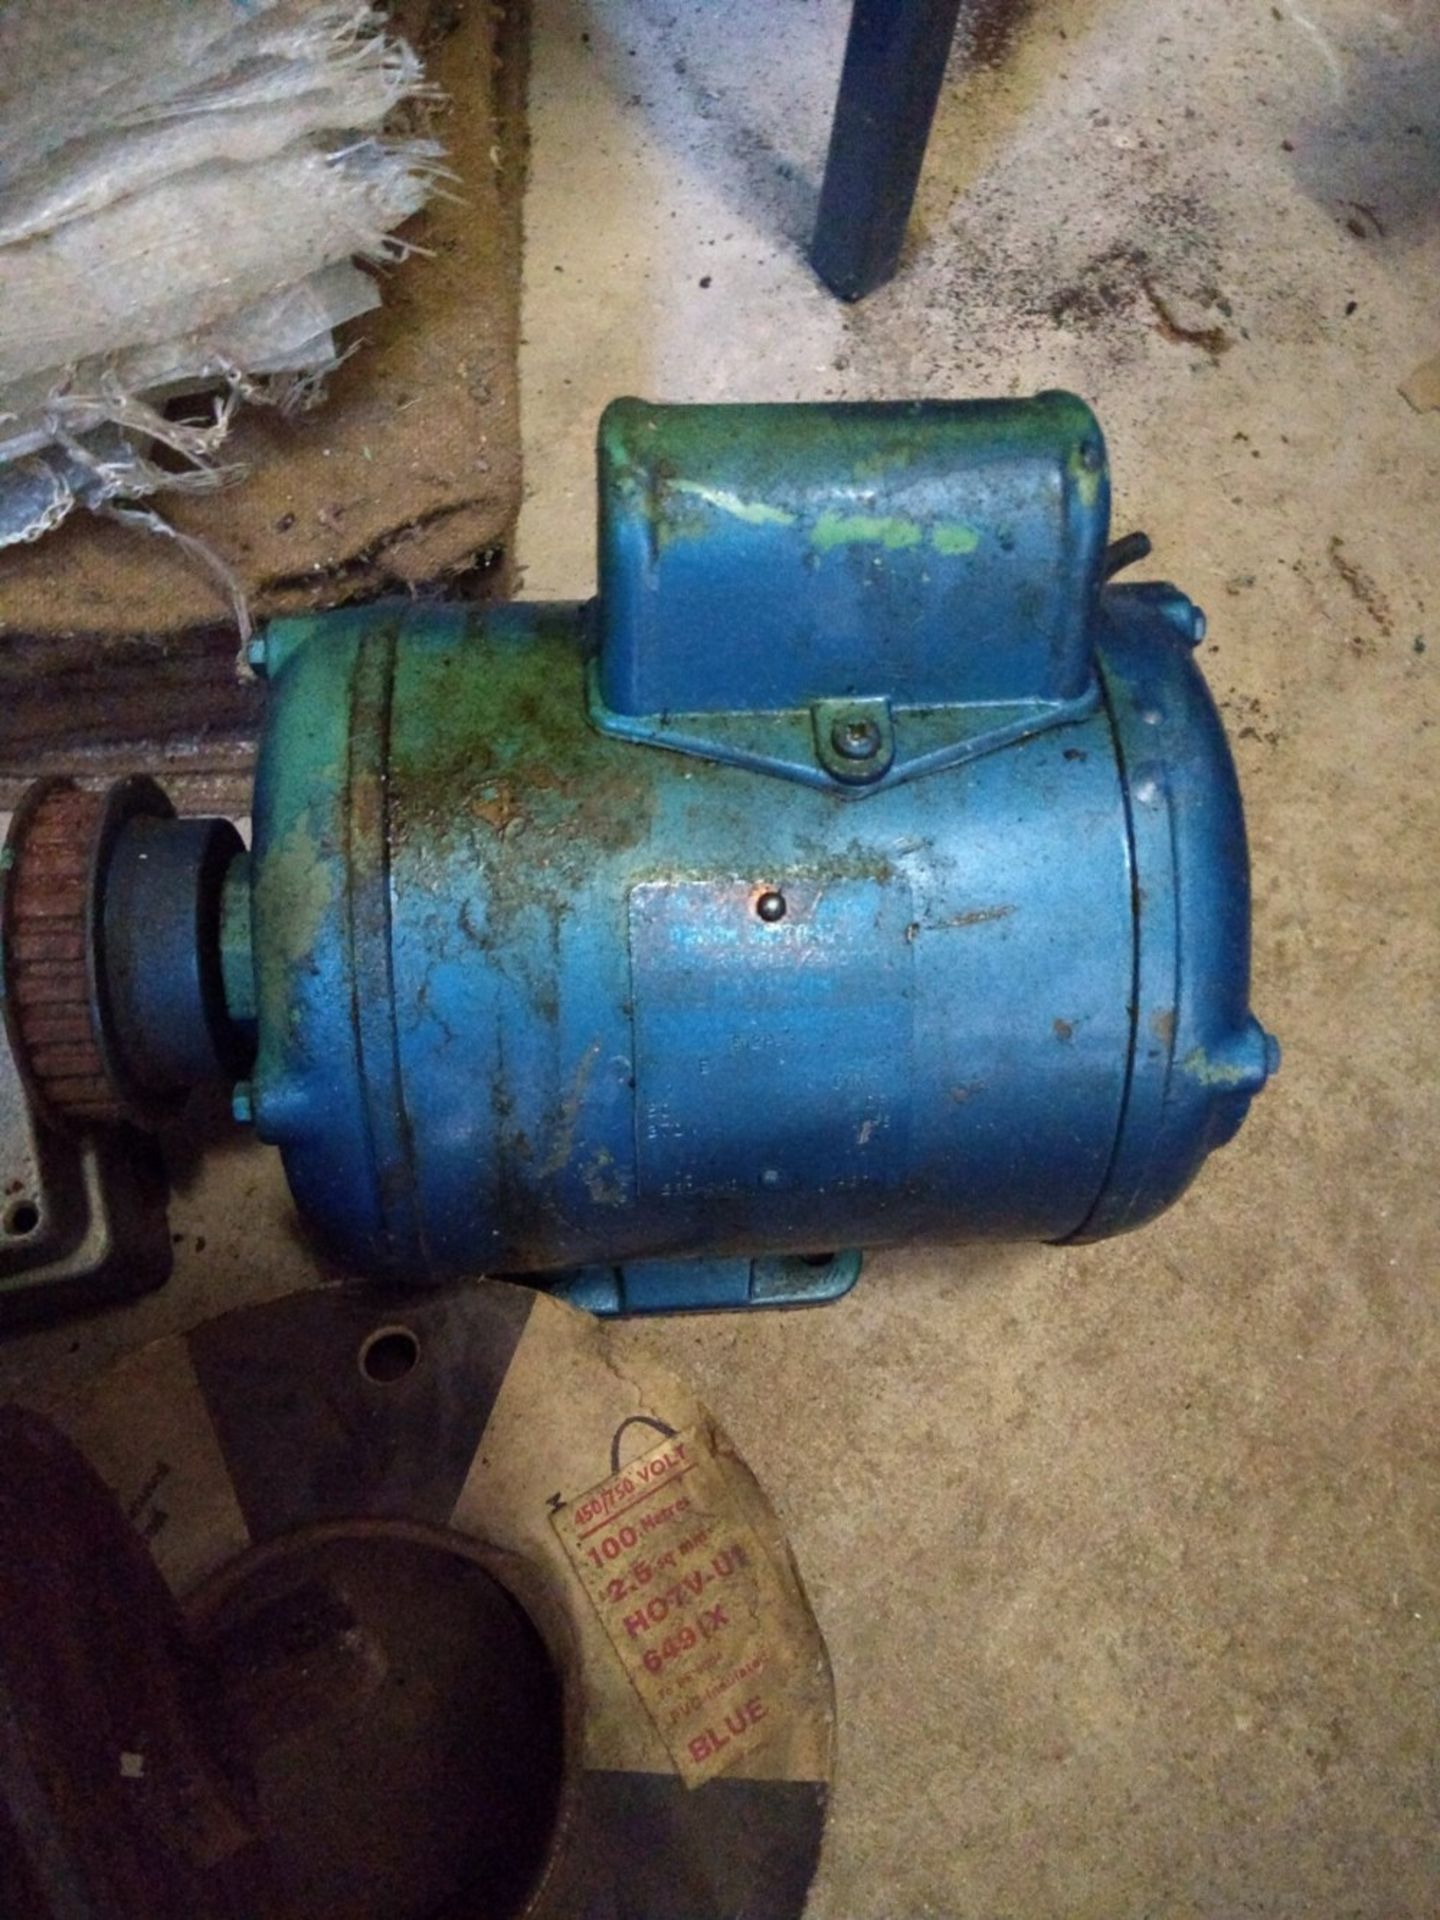 2 x Large motors - unknown if working